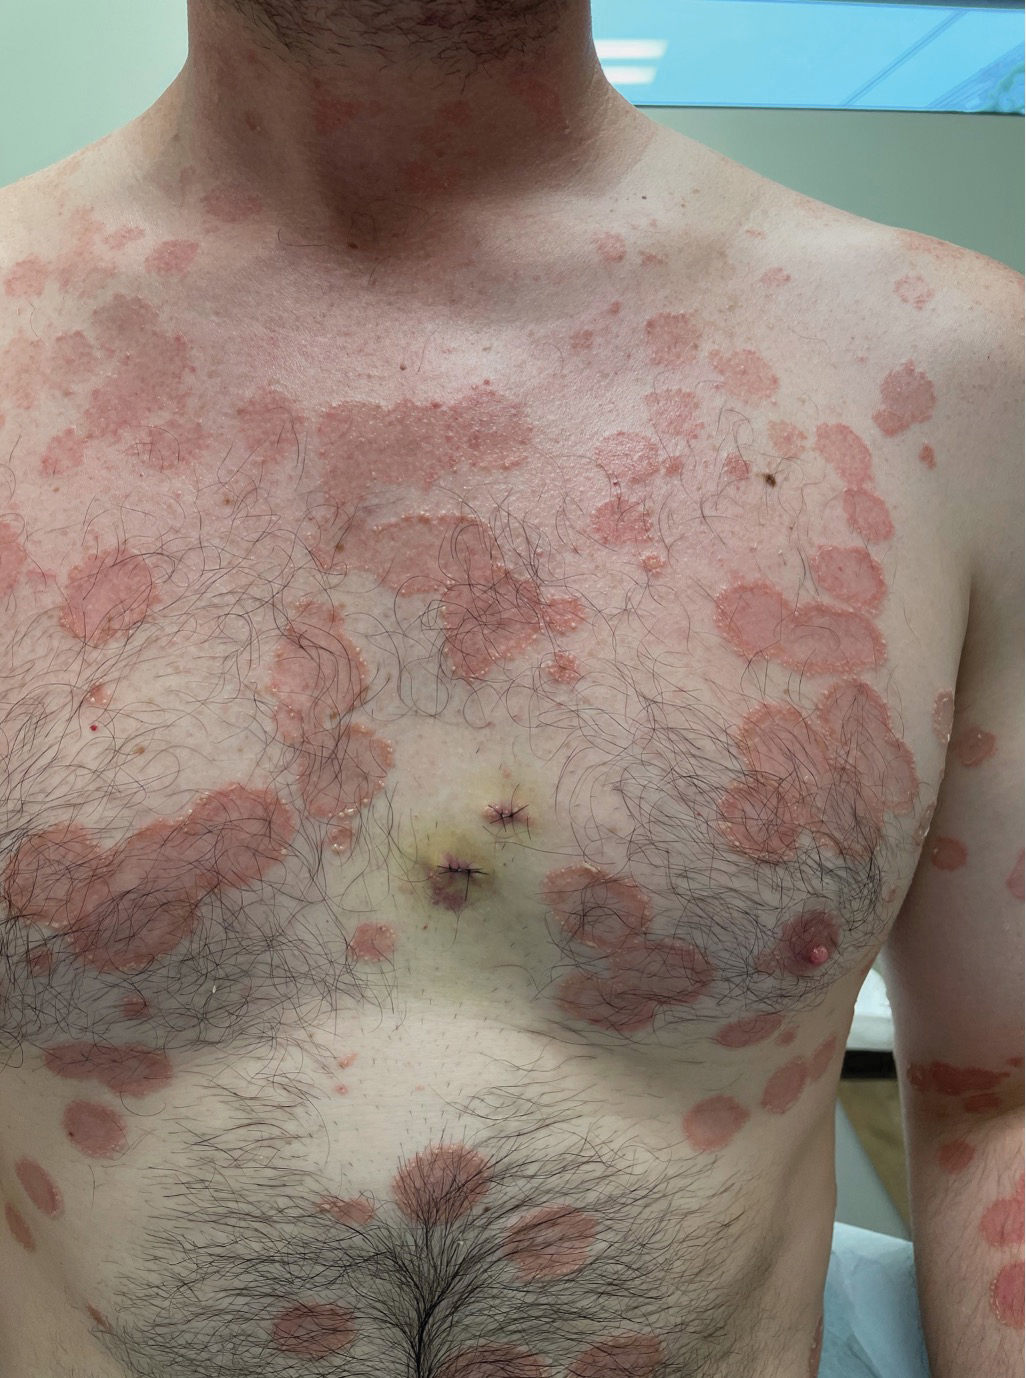 Painful and pruritic eruptions on the entire body